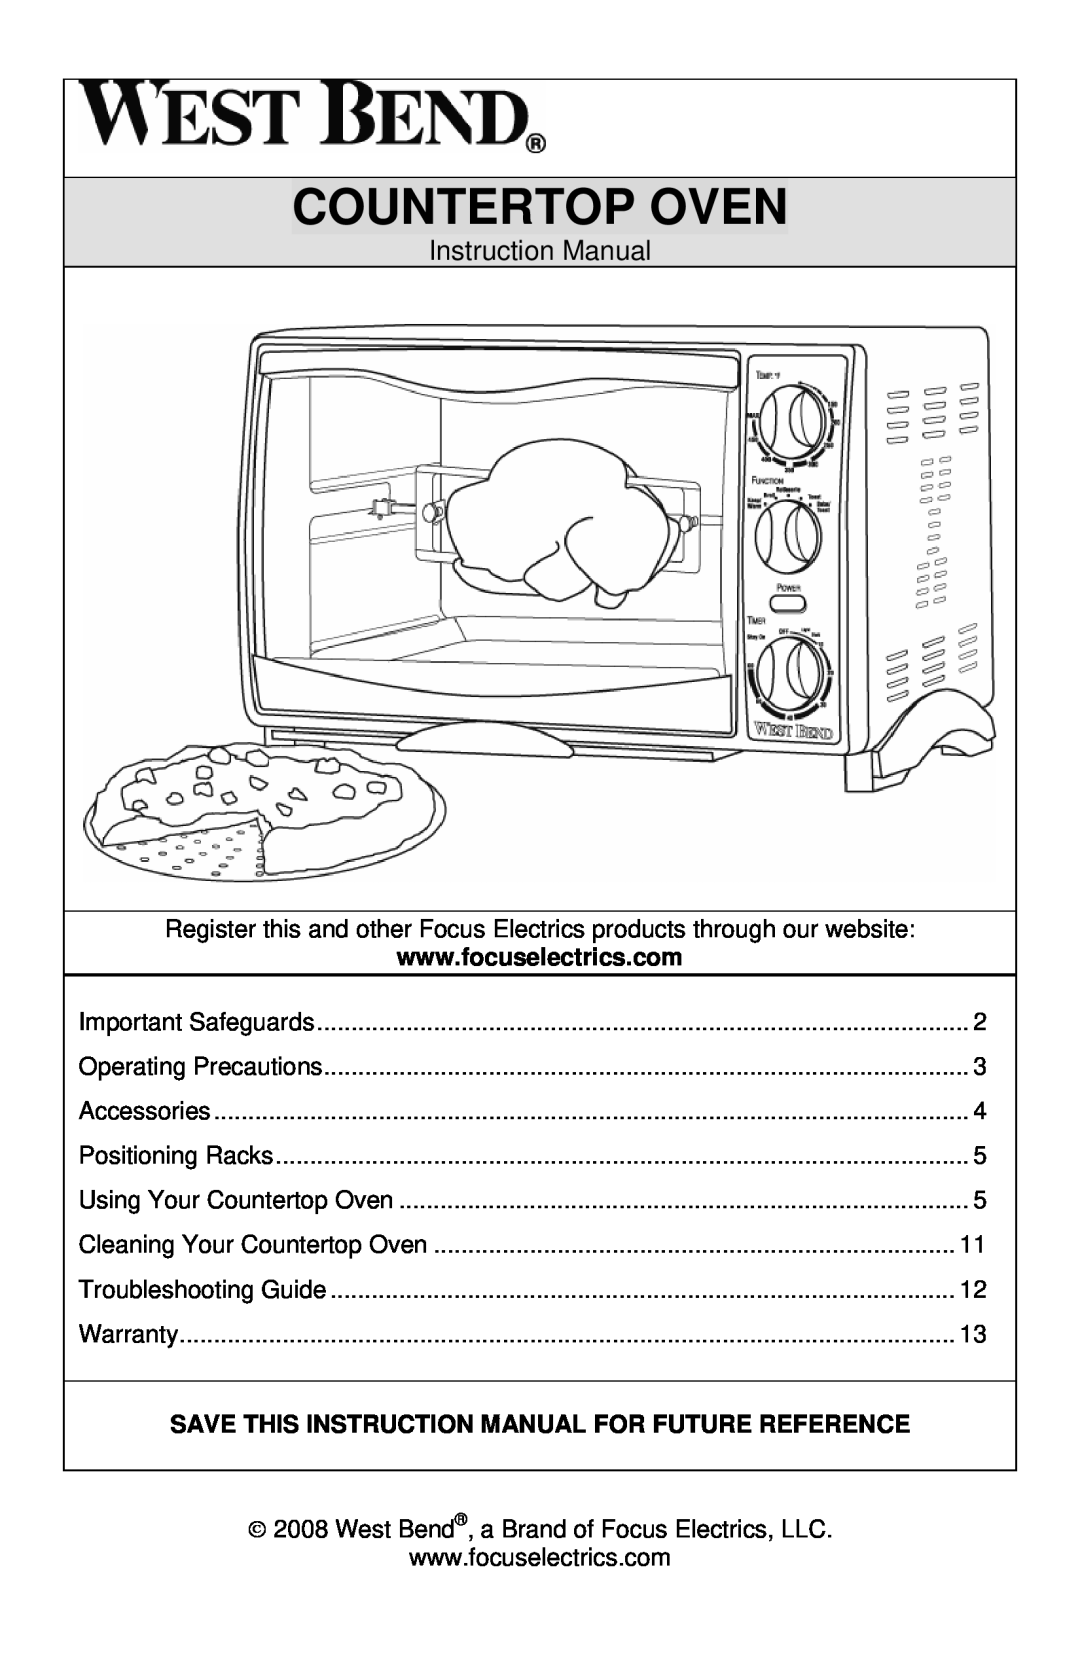 West Bend L5658B instruction manual Countertop Oven, Instruction Manual 